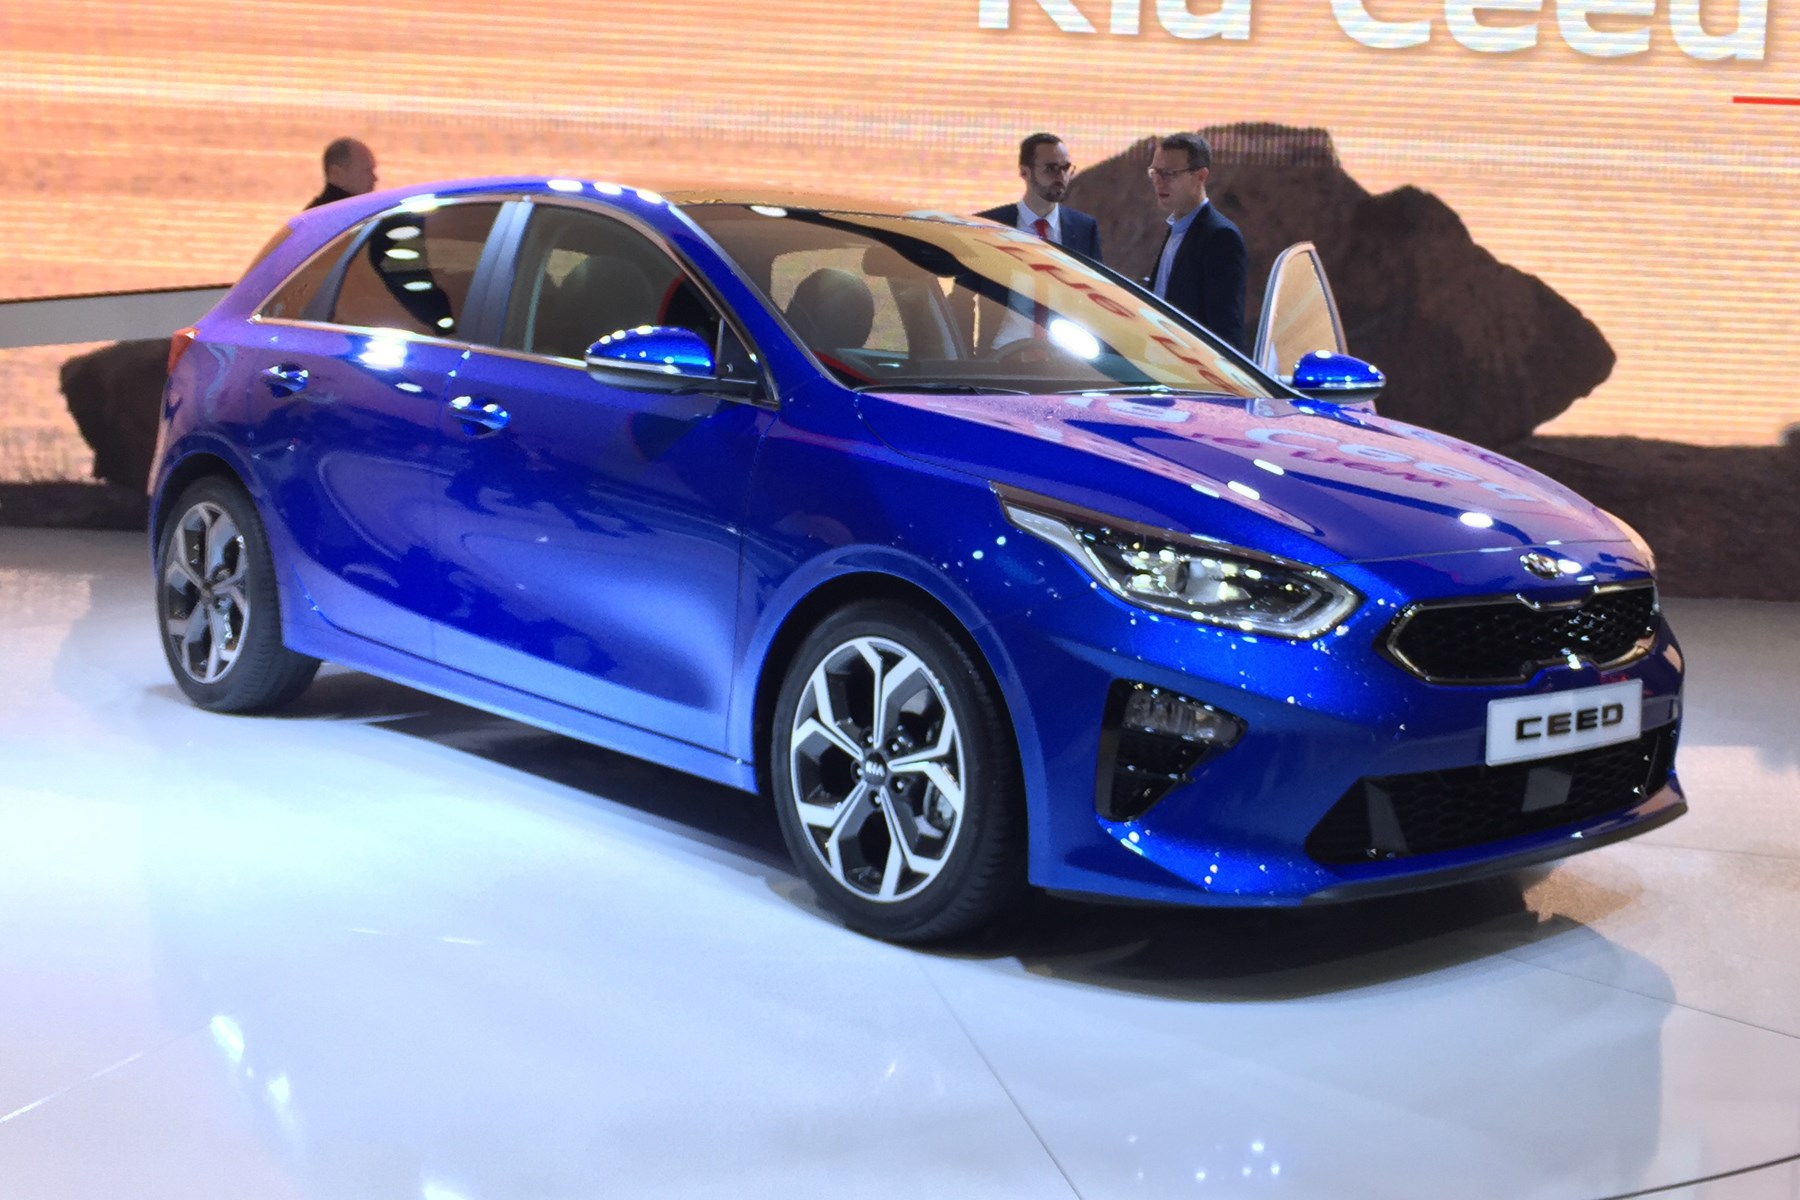 The Kia Ceed Specifications